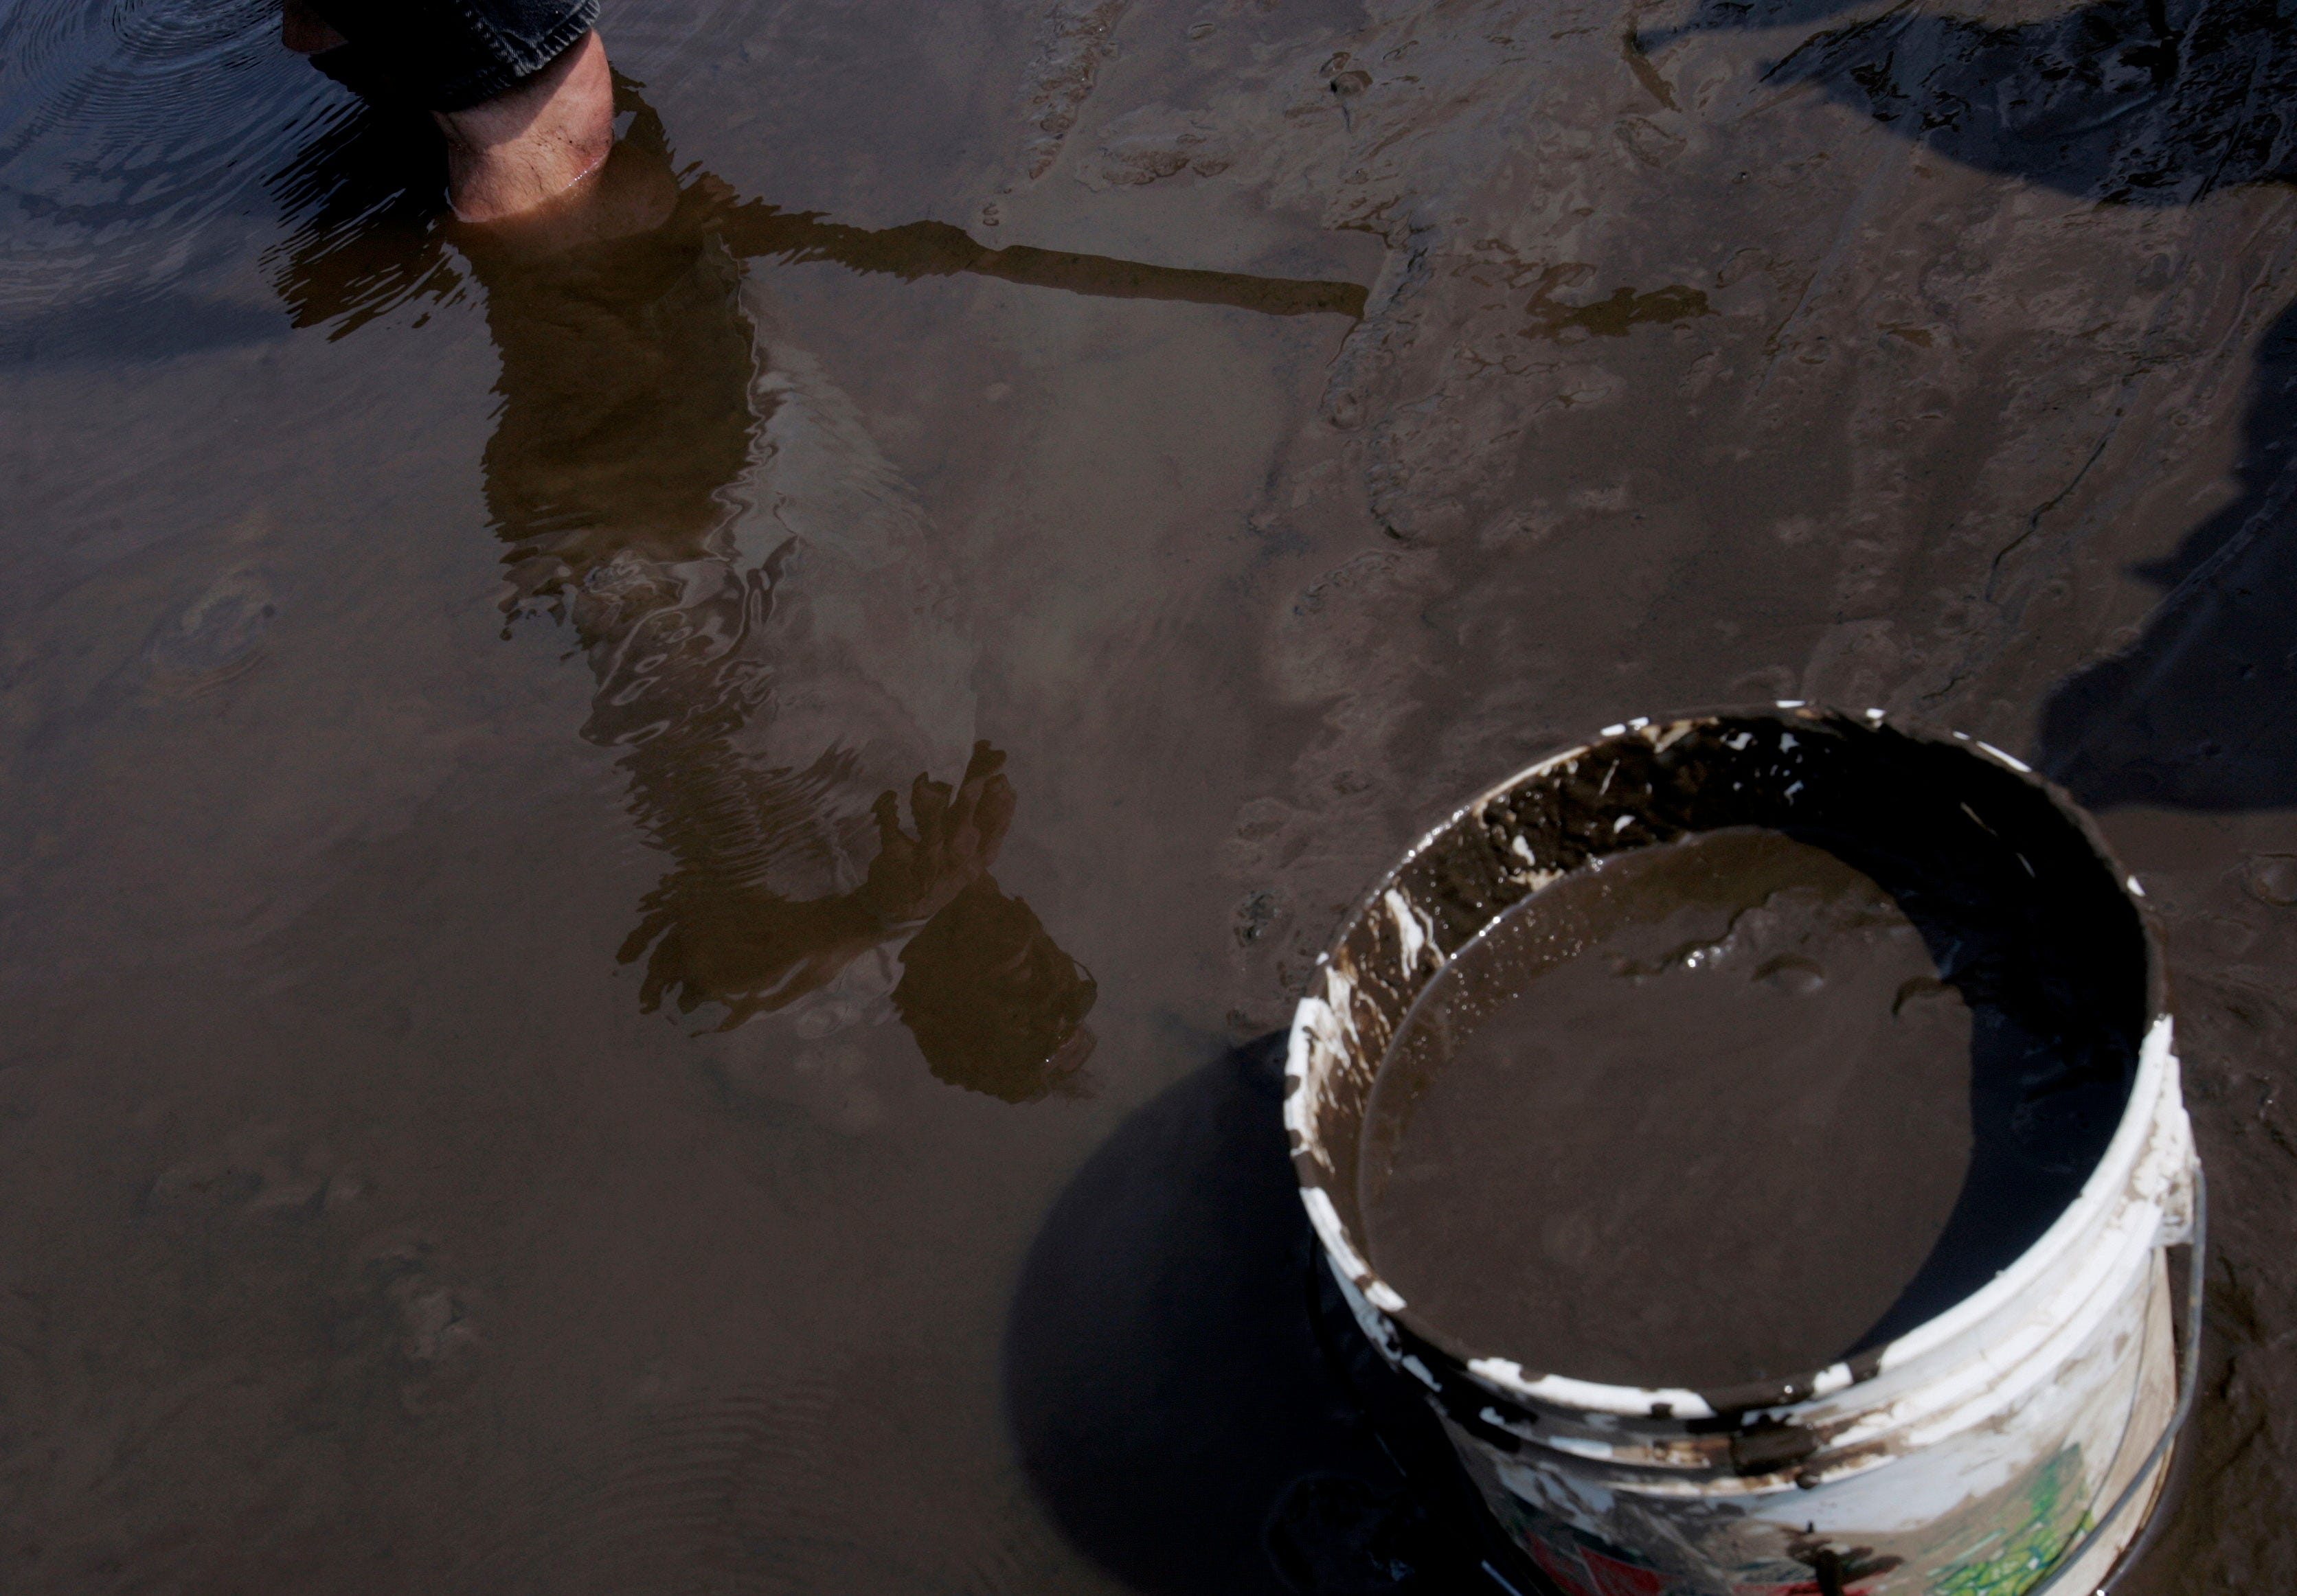 Jim Bintliff is reflected in the murky water while shoveling mud from a small creek in southern New Jersey in 2005. For more than 50 years, Bintliff's Lena Blackburne Baseball Rubbing Mud company has provided high-quality mud to Major League Baseball to get slick, shiny new baseballs ready for play. (AP file photo/Coke Whitworth)